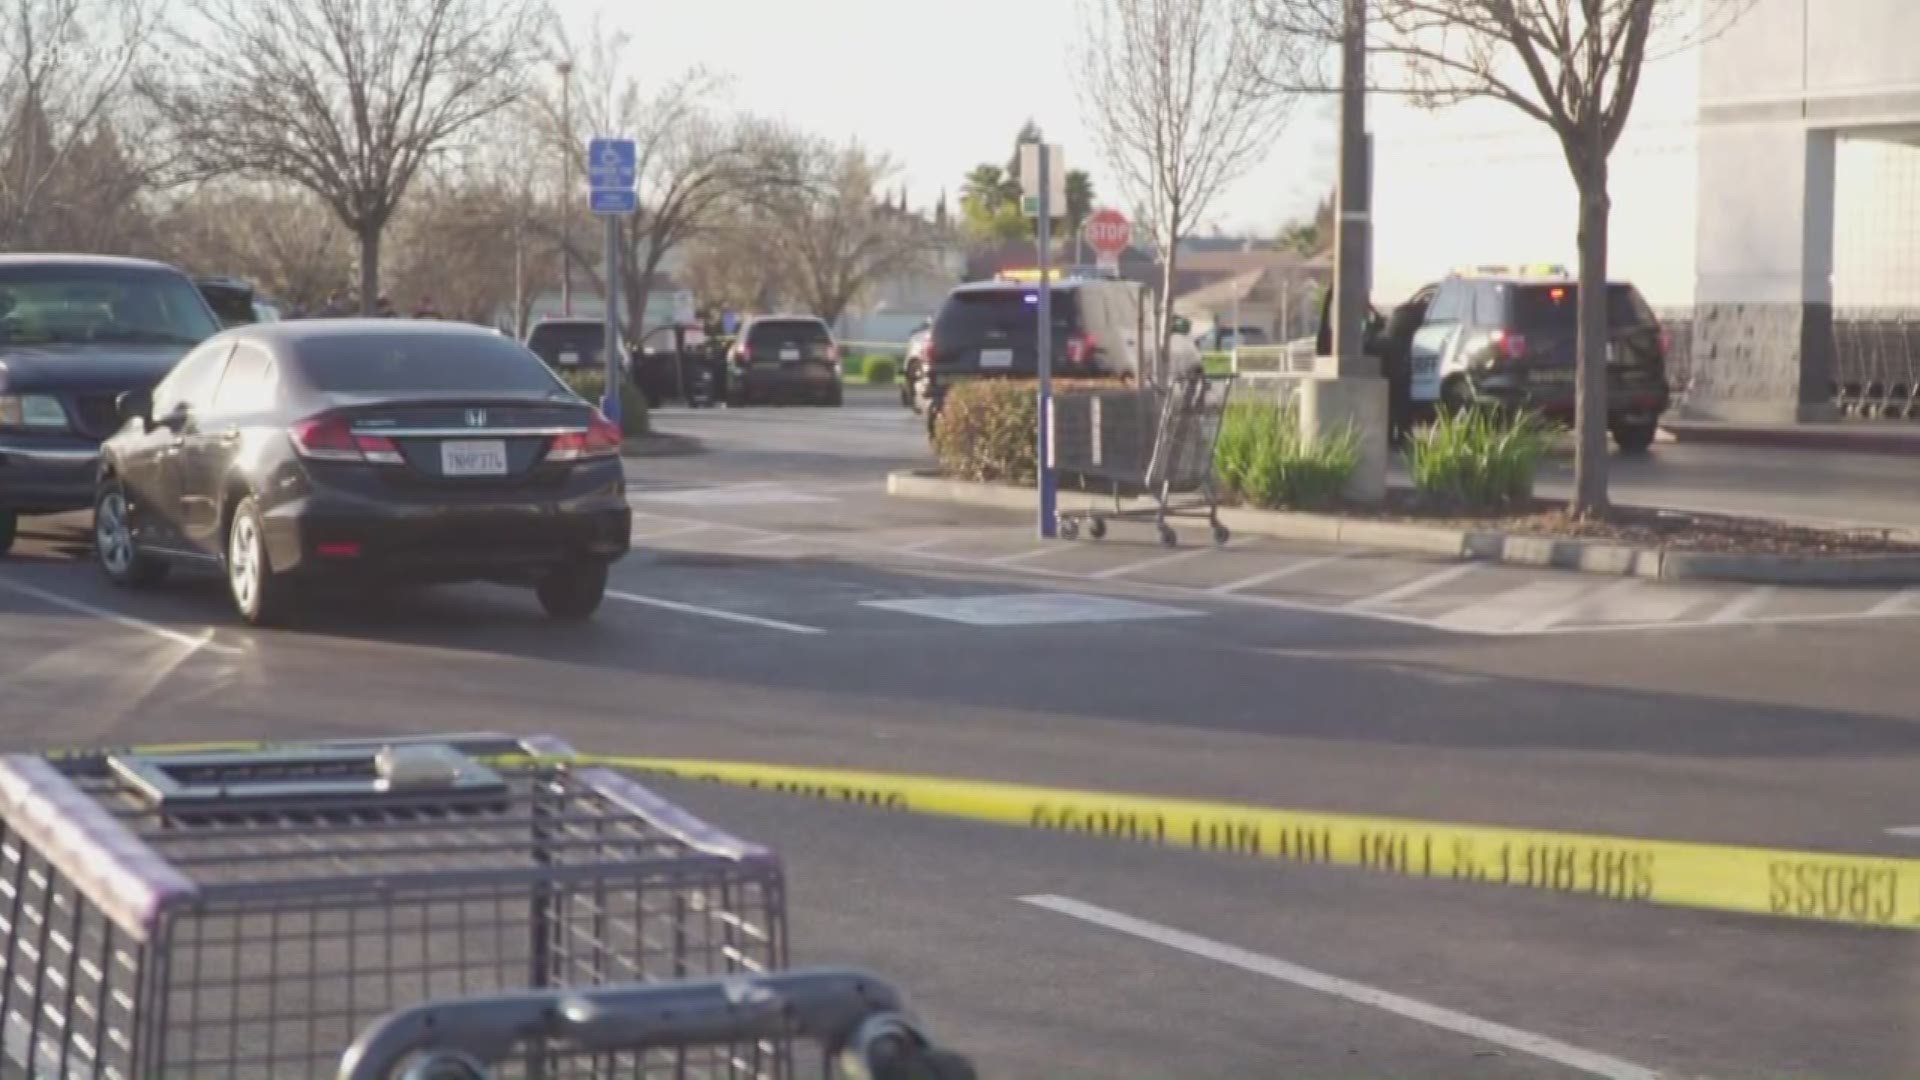 The incident took place near Winco Foods, near Walerga Road and Elverta Road in Antelope, according to Sacramento County Sheriff's Office.